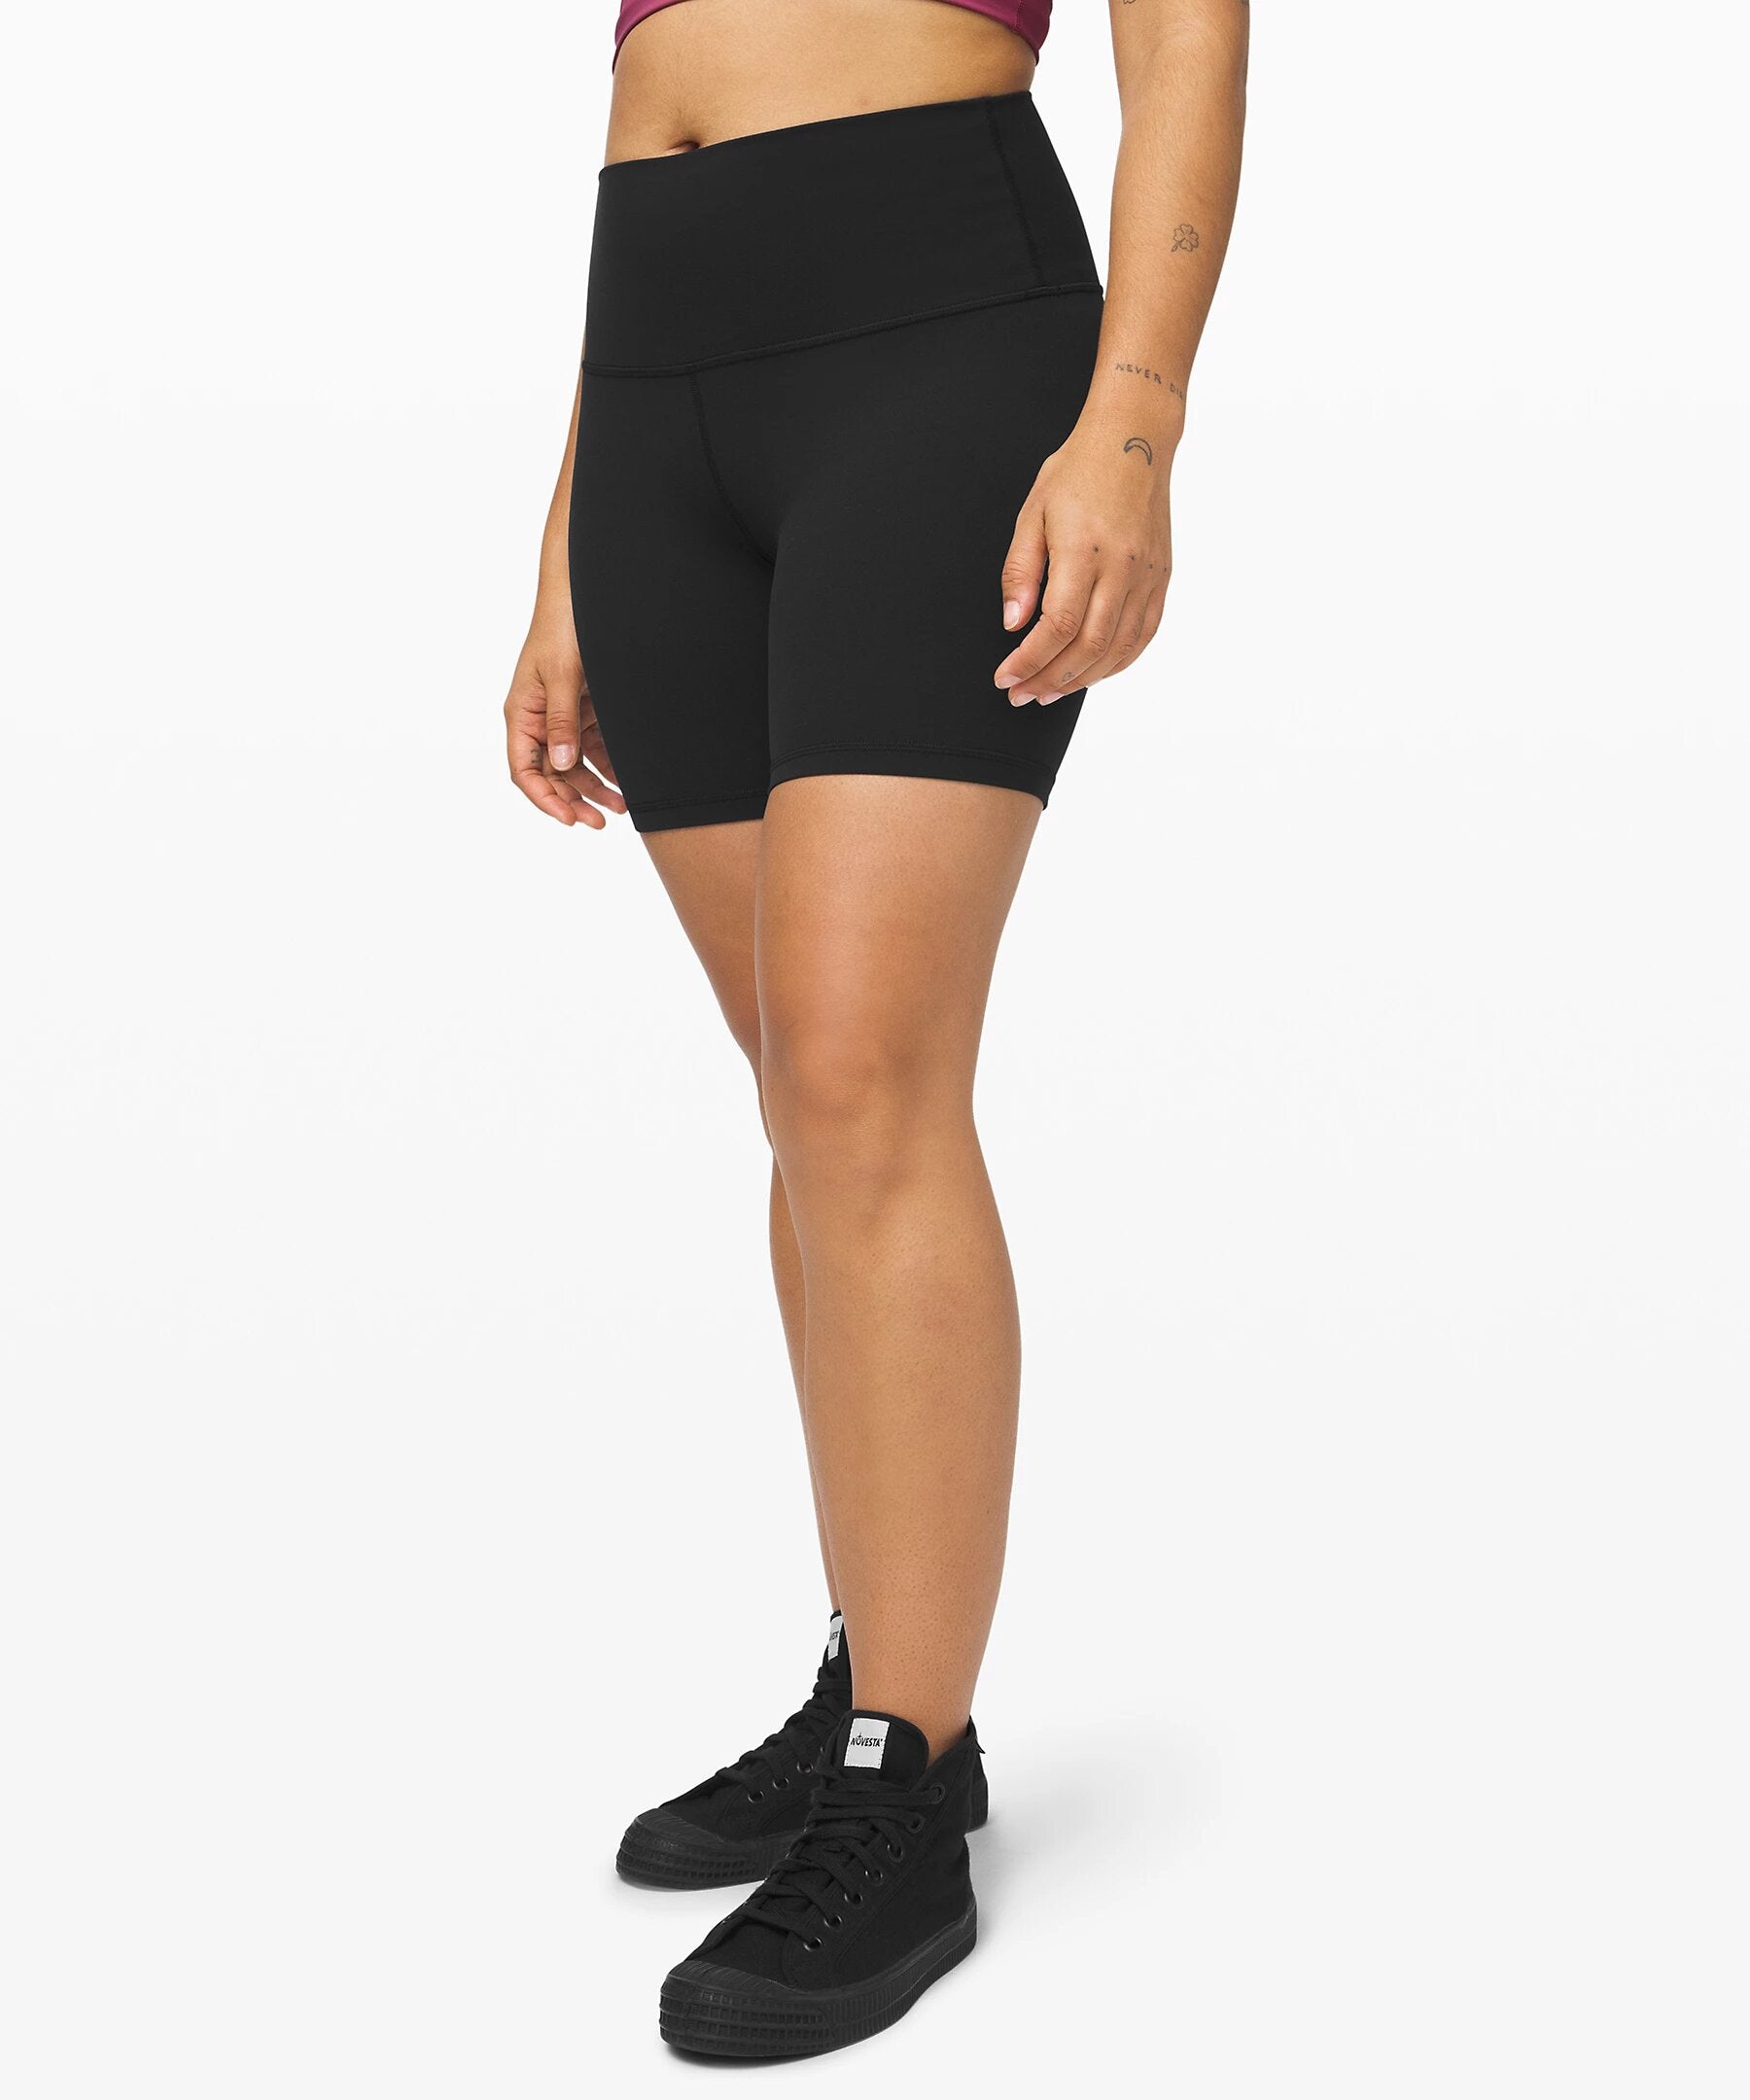 Lululemon best bike shorts are on sale, plus 10 other We Made Too